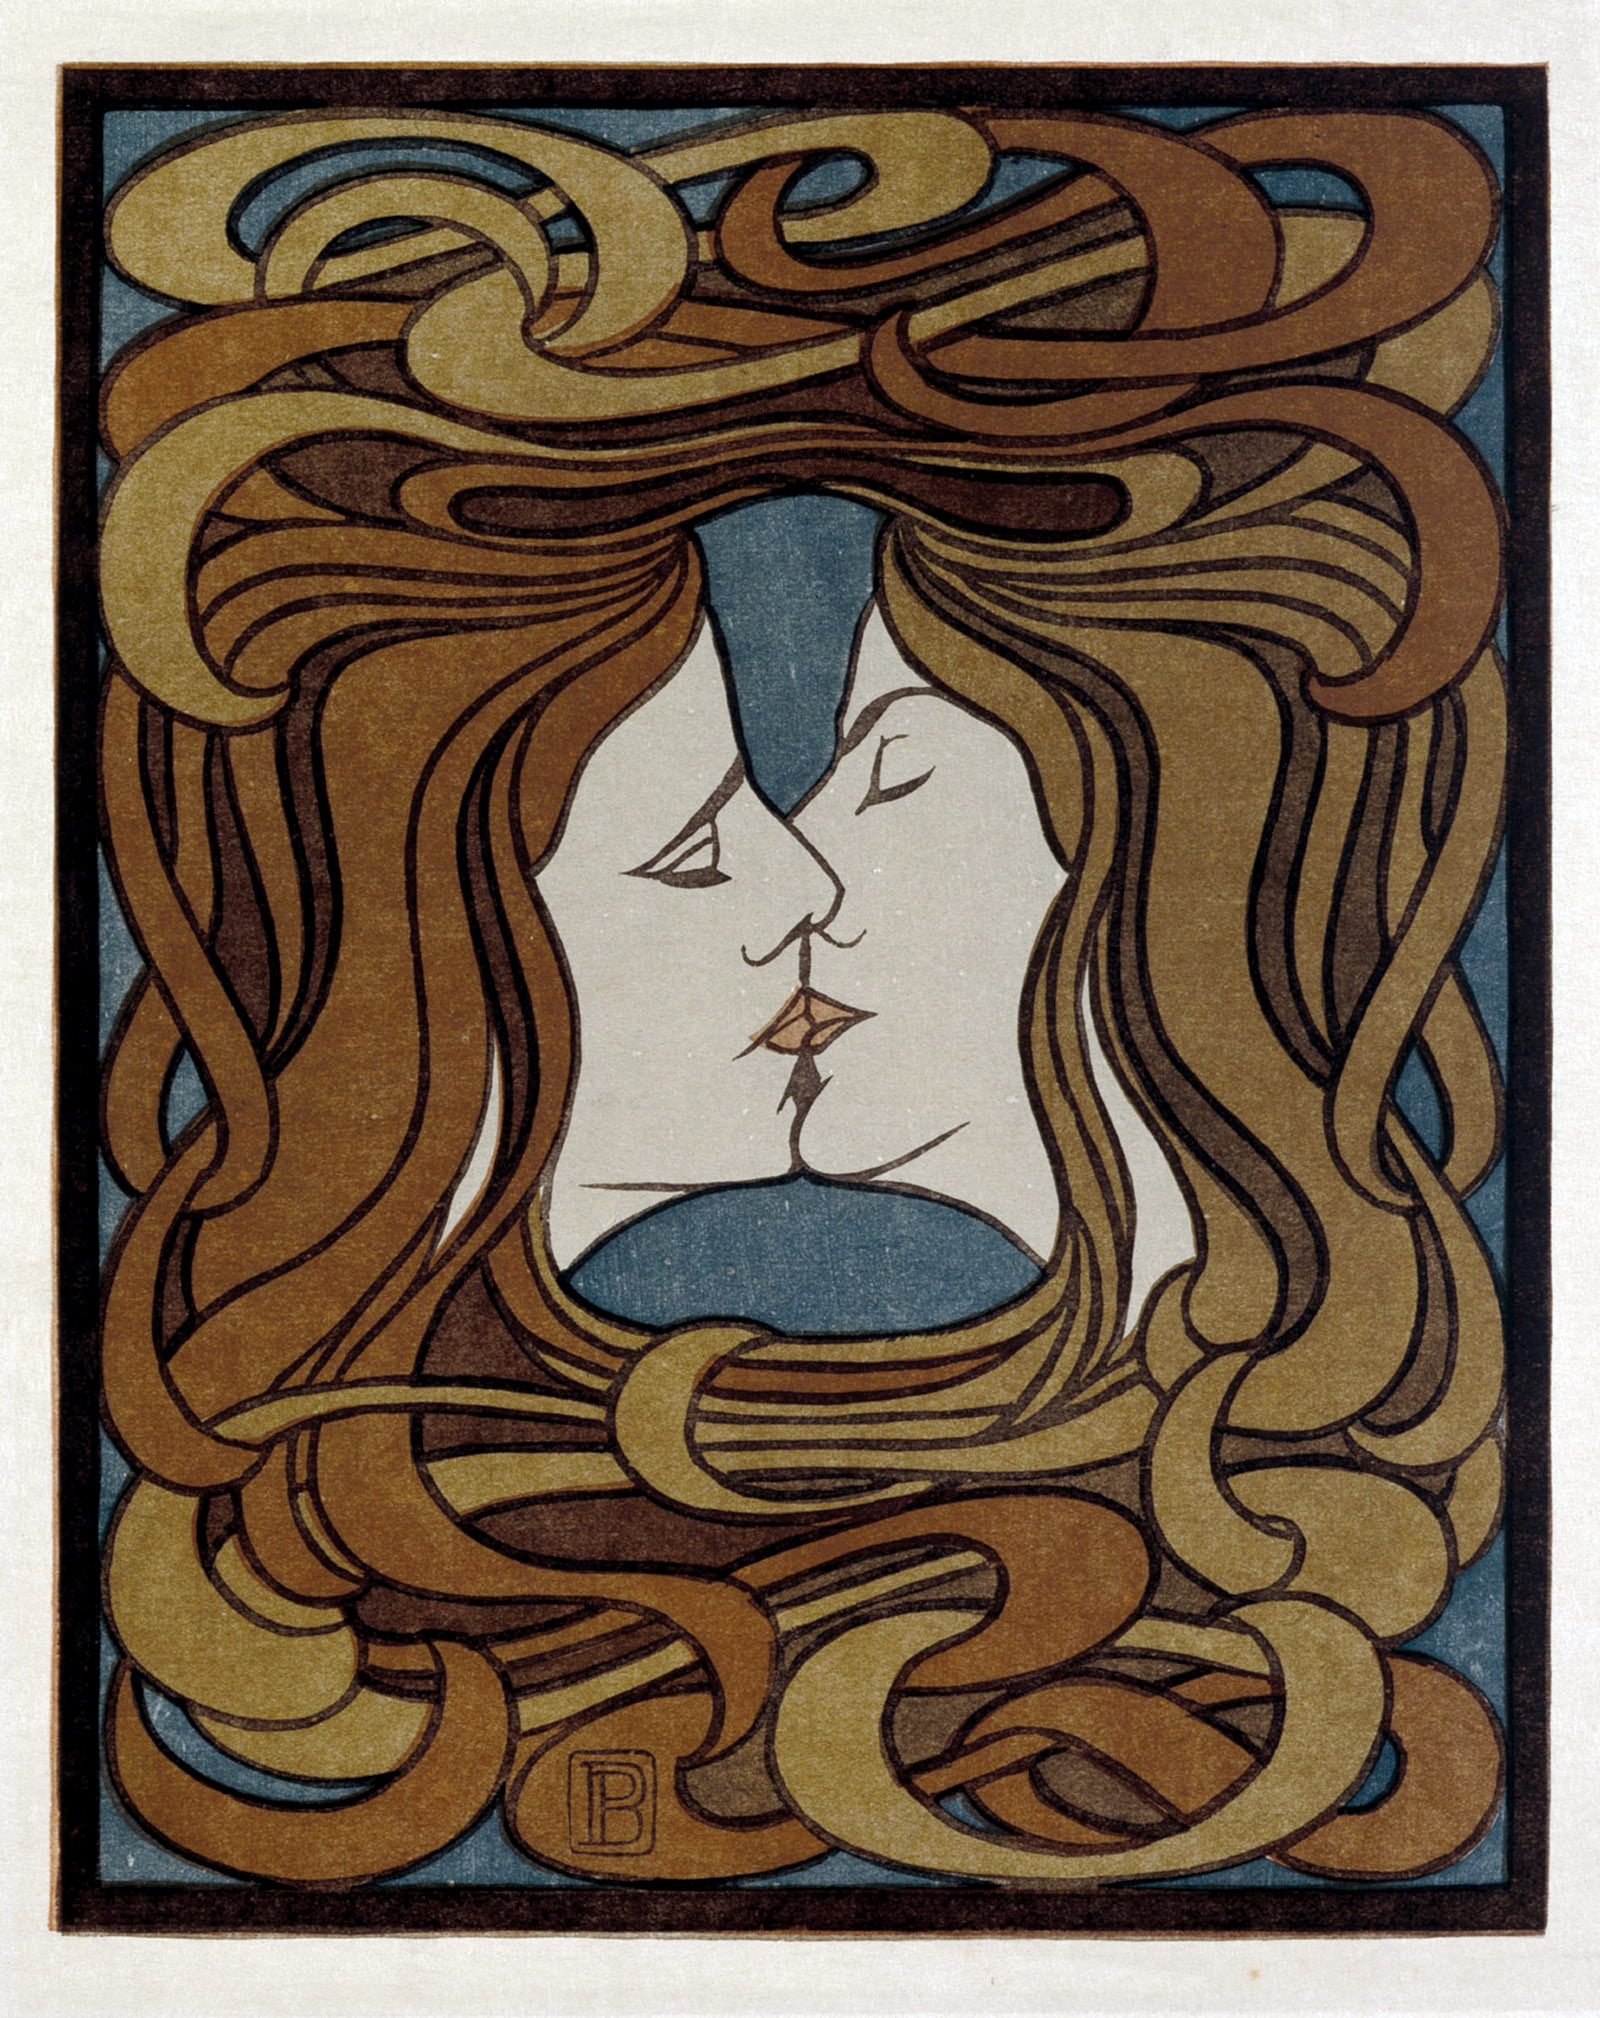 The Kiss; artwork by Peter Behrens